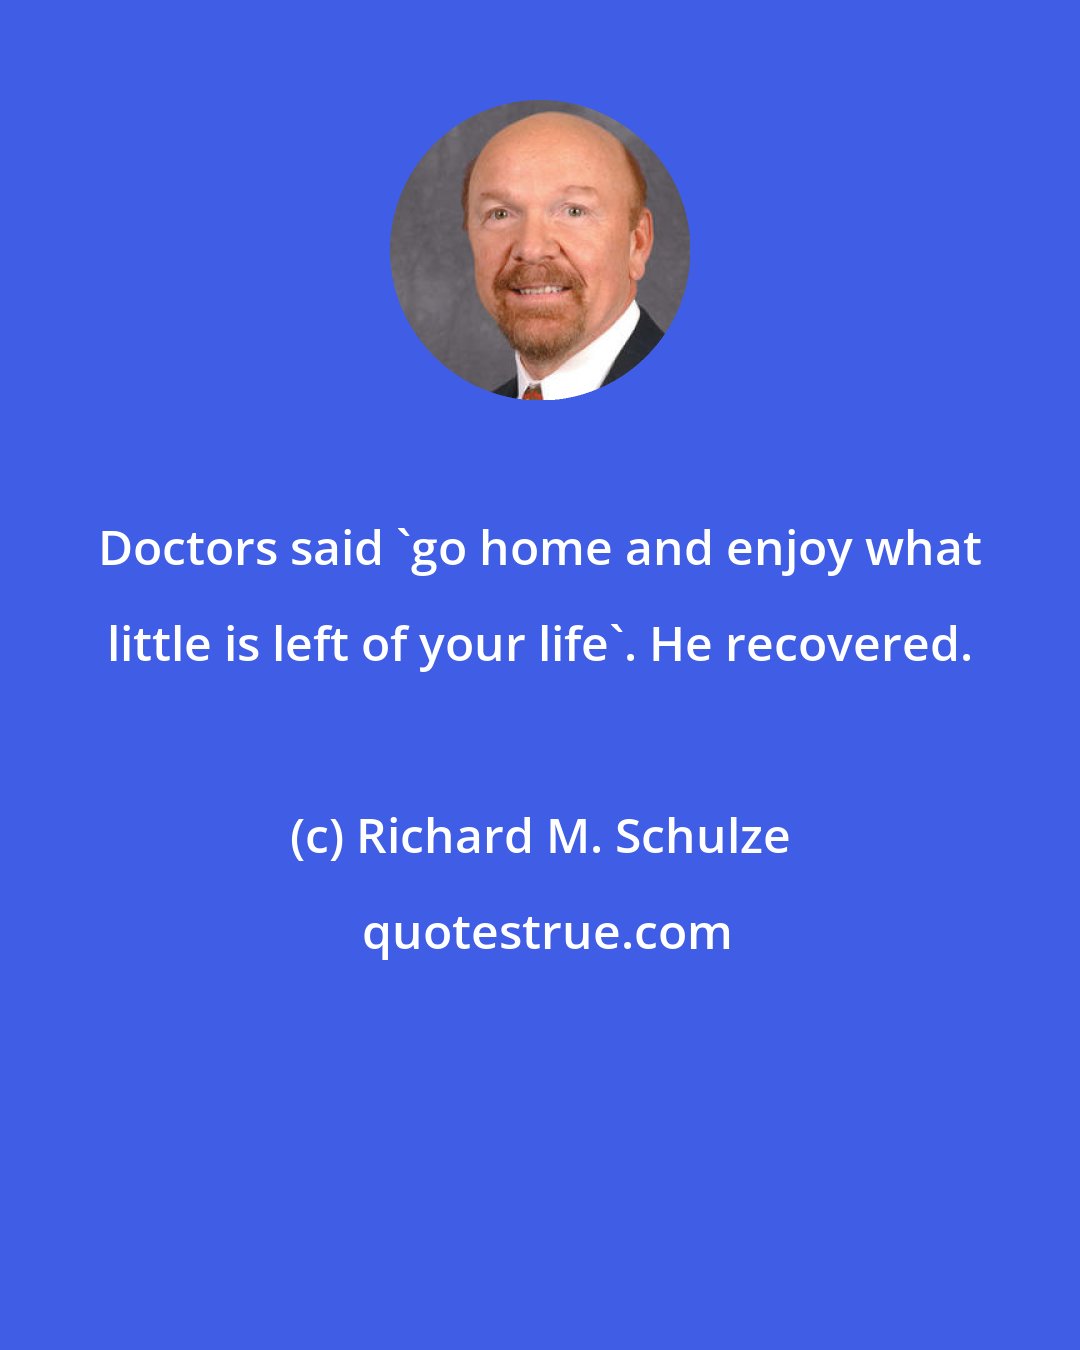 Richard M. Schulze: Doctors said 'go home and enjoy what little is left of your life'. He recovered.